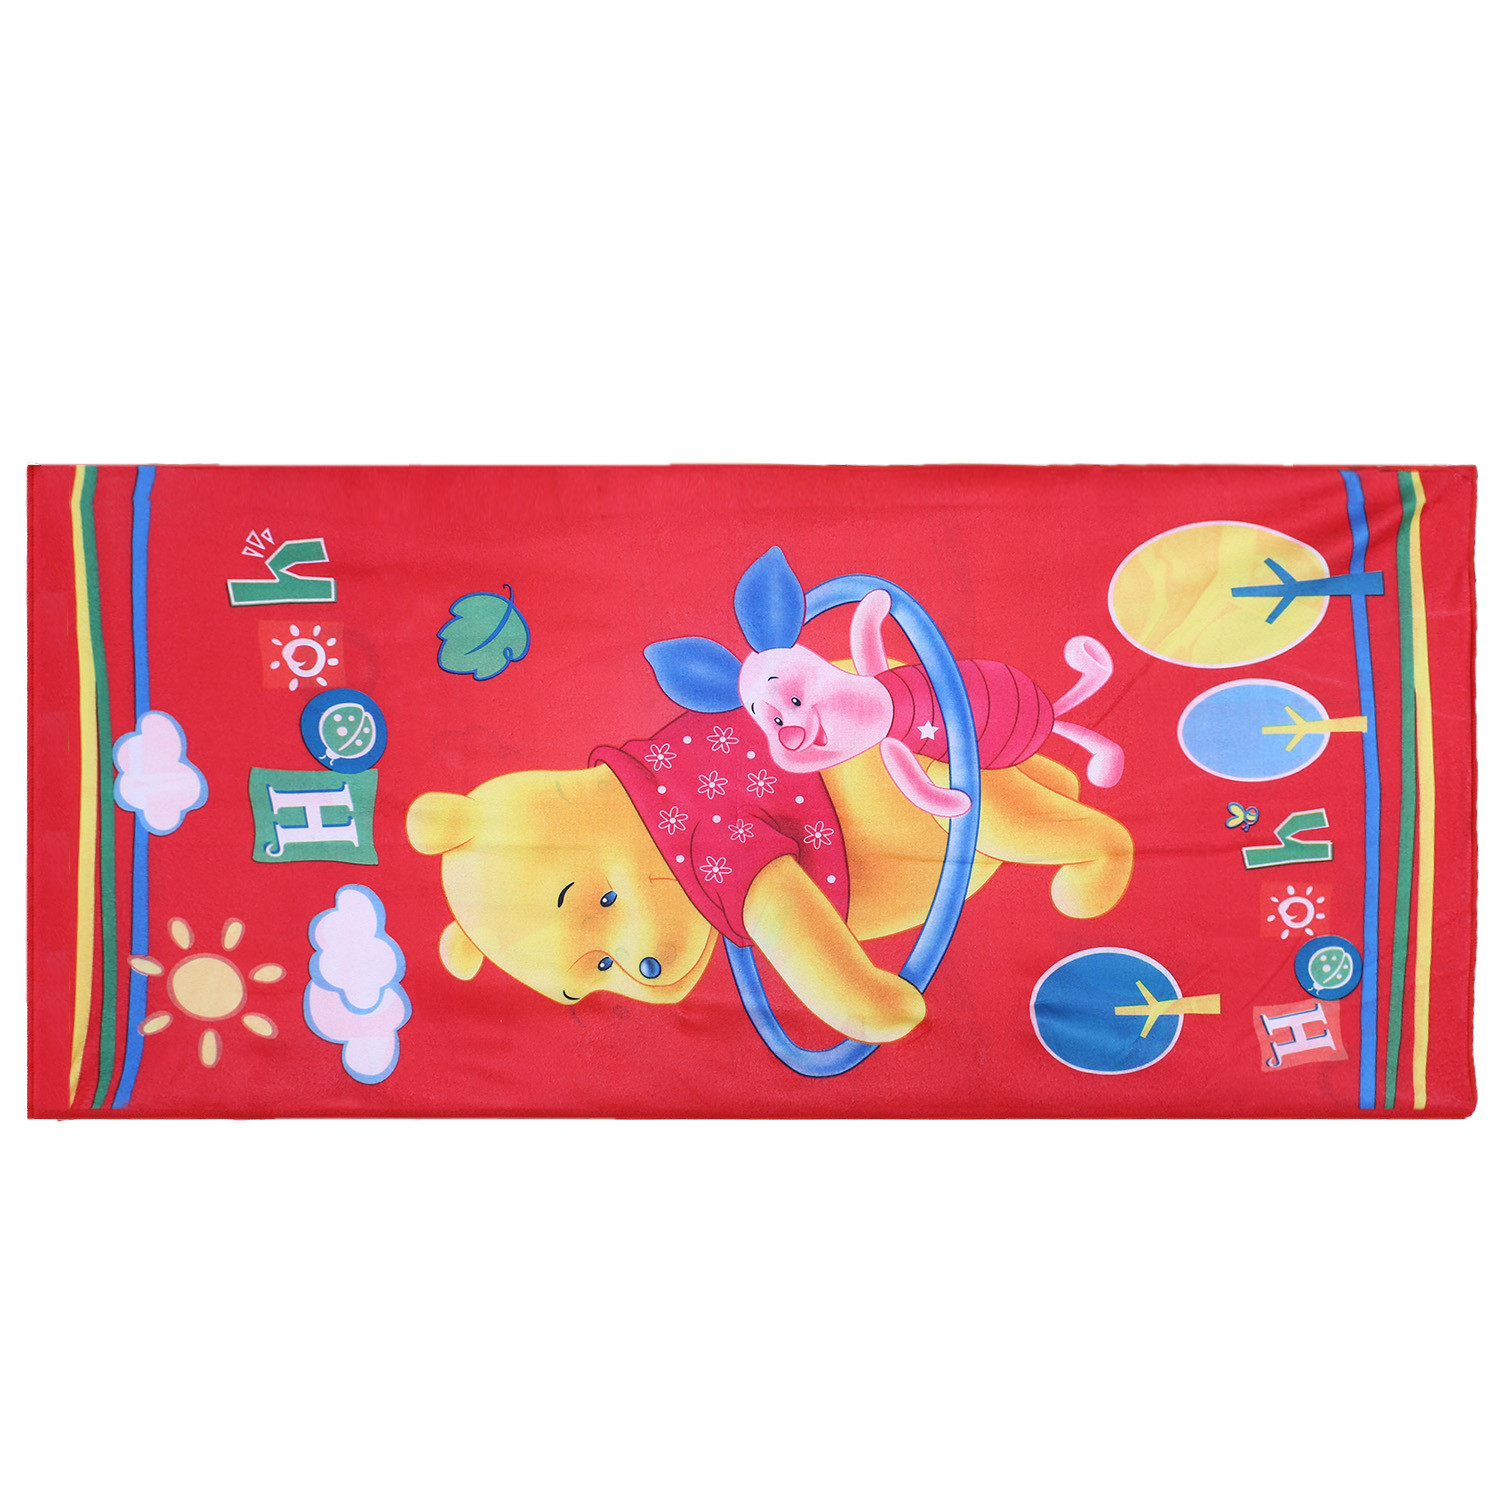 Kuber Industries Kids Bath Towel|Soft Cotton & Sides Stitched Baby Towel|Microfibered Winnie the Pooh and Piglet Pattern Toddler Towel,55x26 Inch (Red)